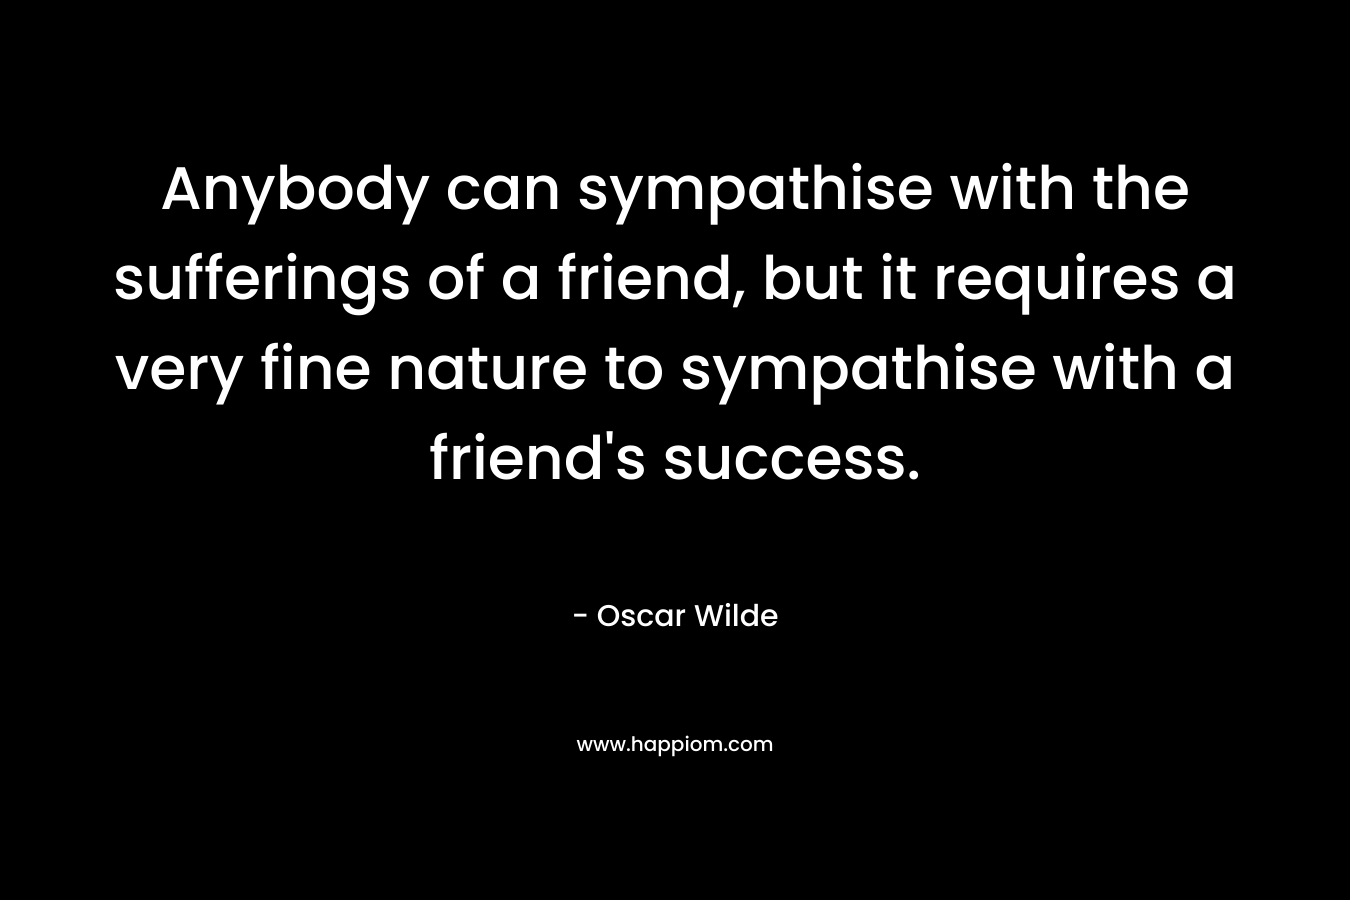 Anybody can sympathise with the sufferings of a friend, but it requires a very fine nature to sympathise with a friend's success.